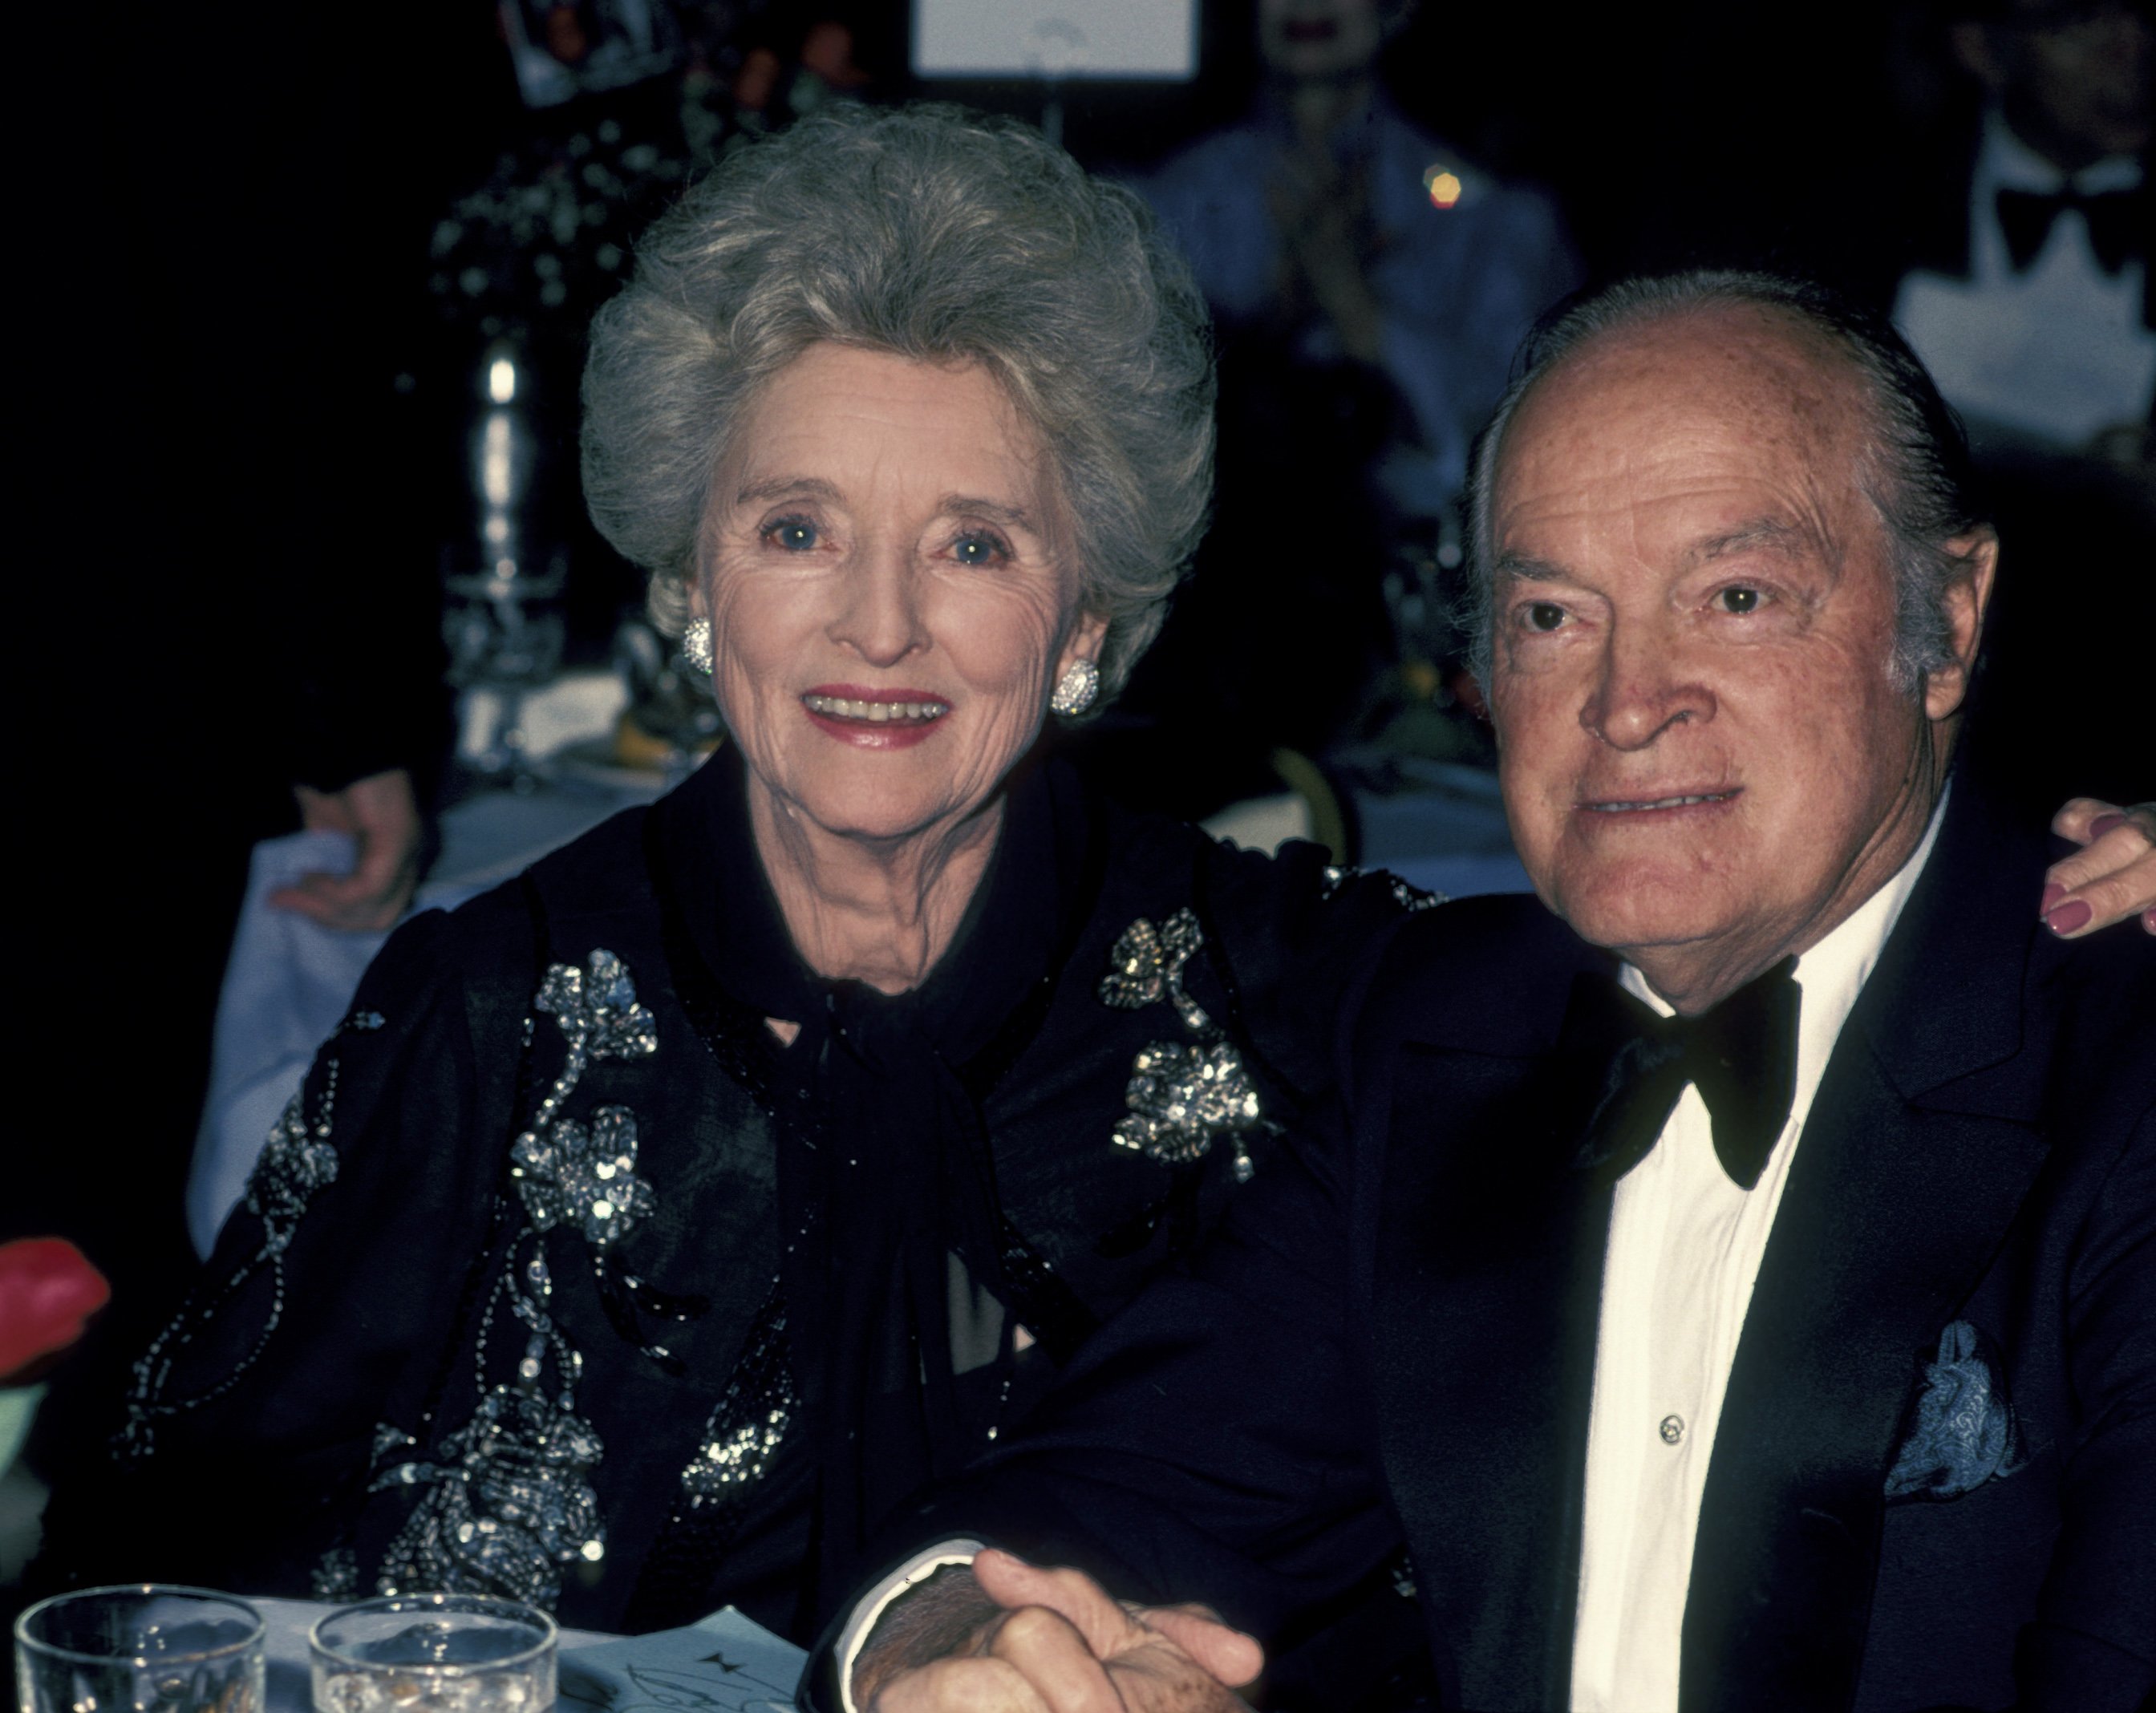 Bob Hope and Dolores Hope being honored by St. Joseph Medical Center Guild on March 18, 1983 | Source: Getty Images